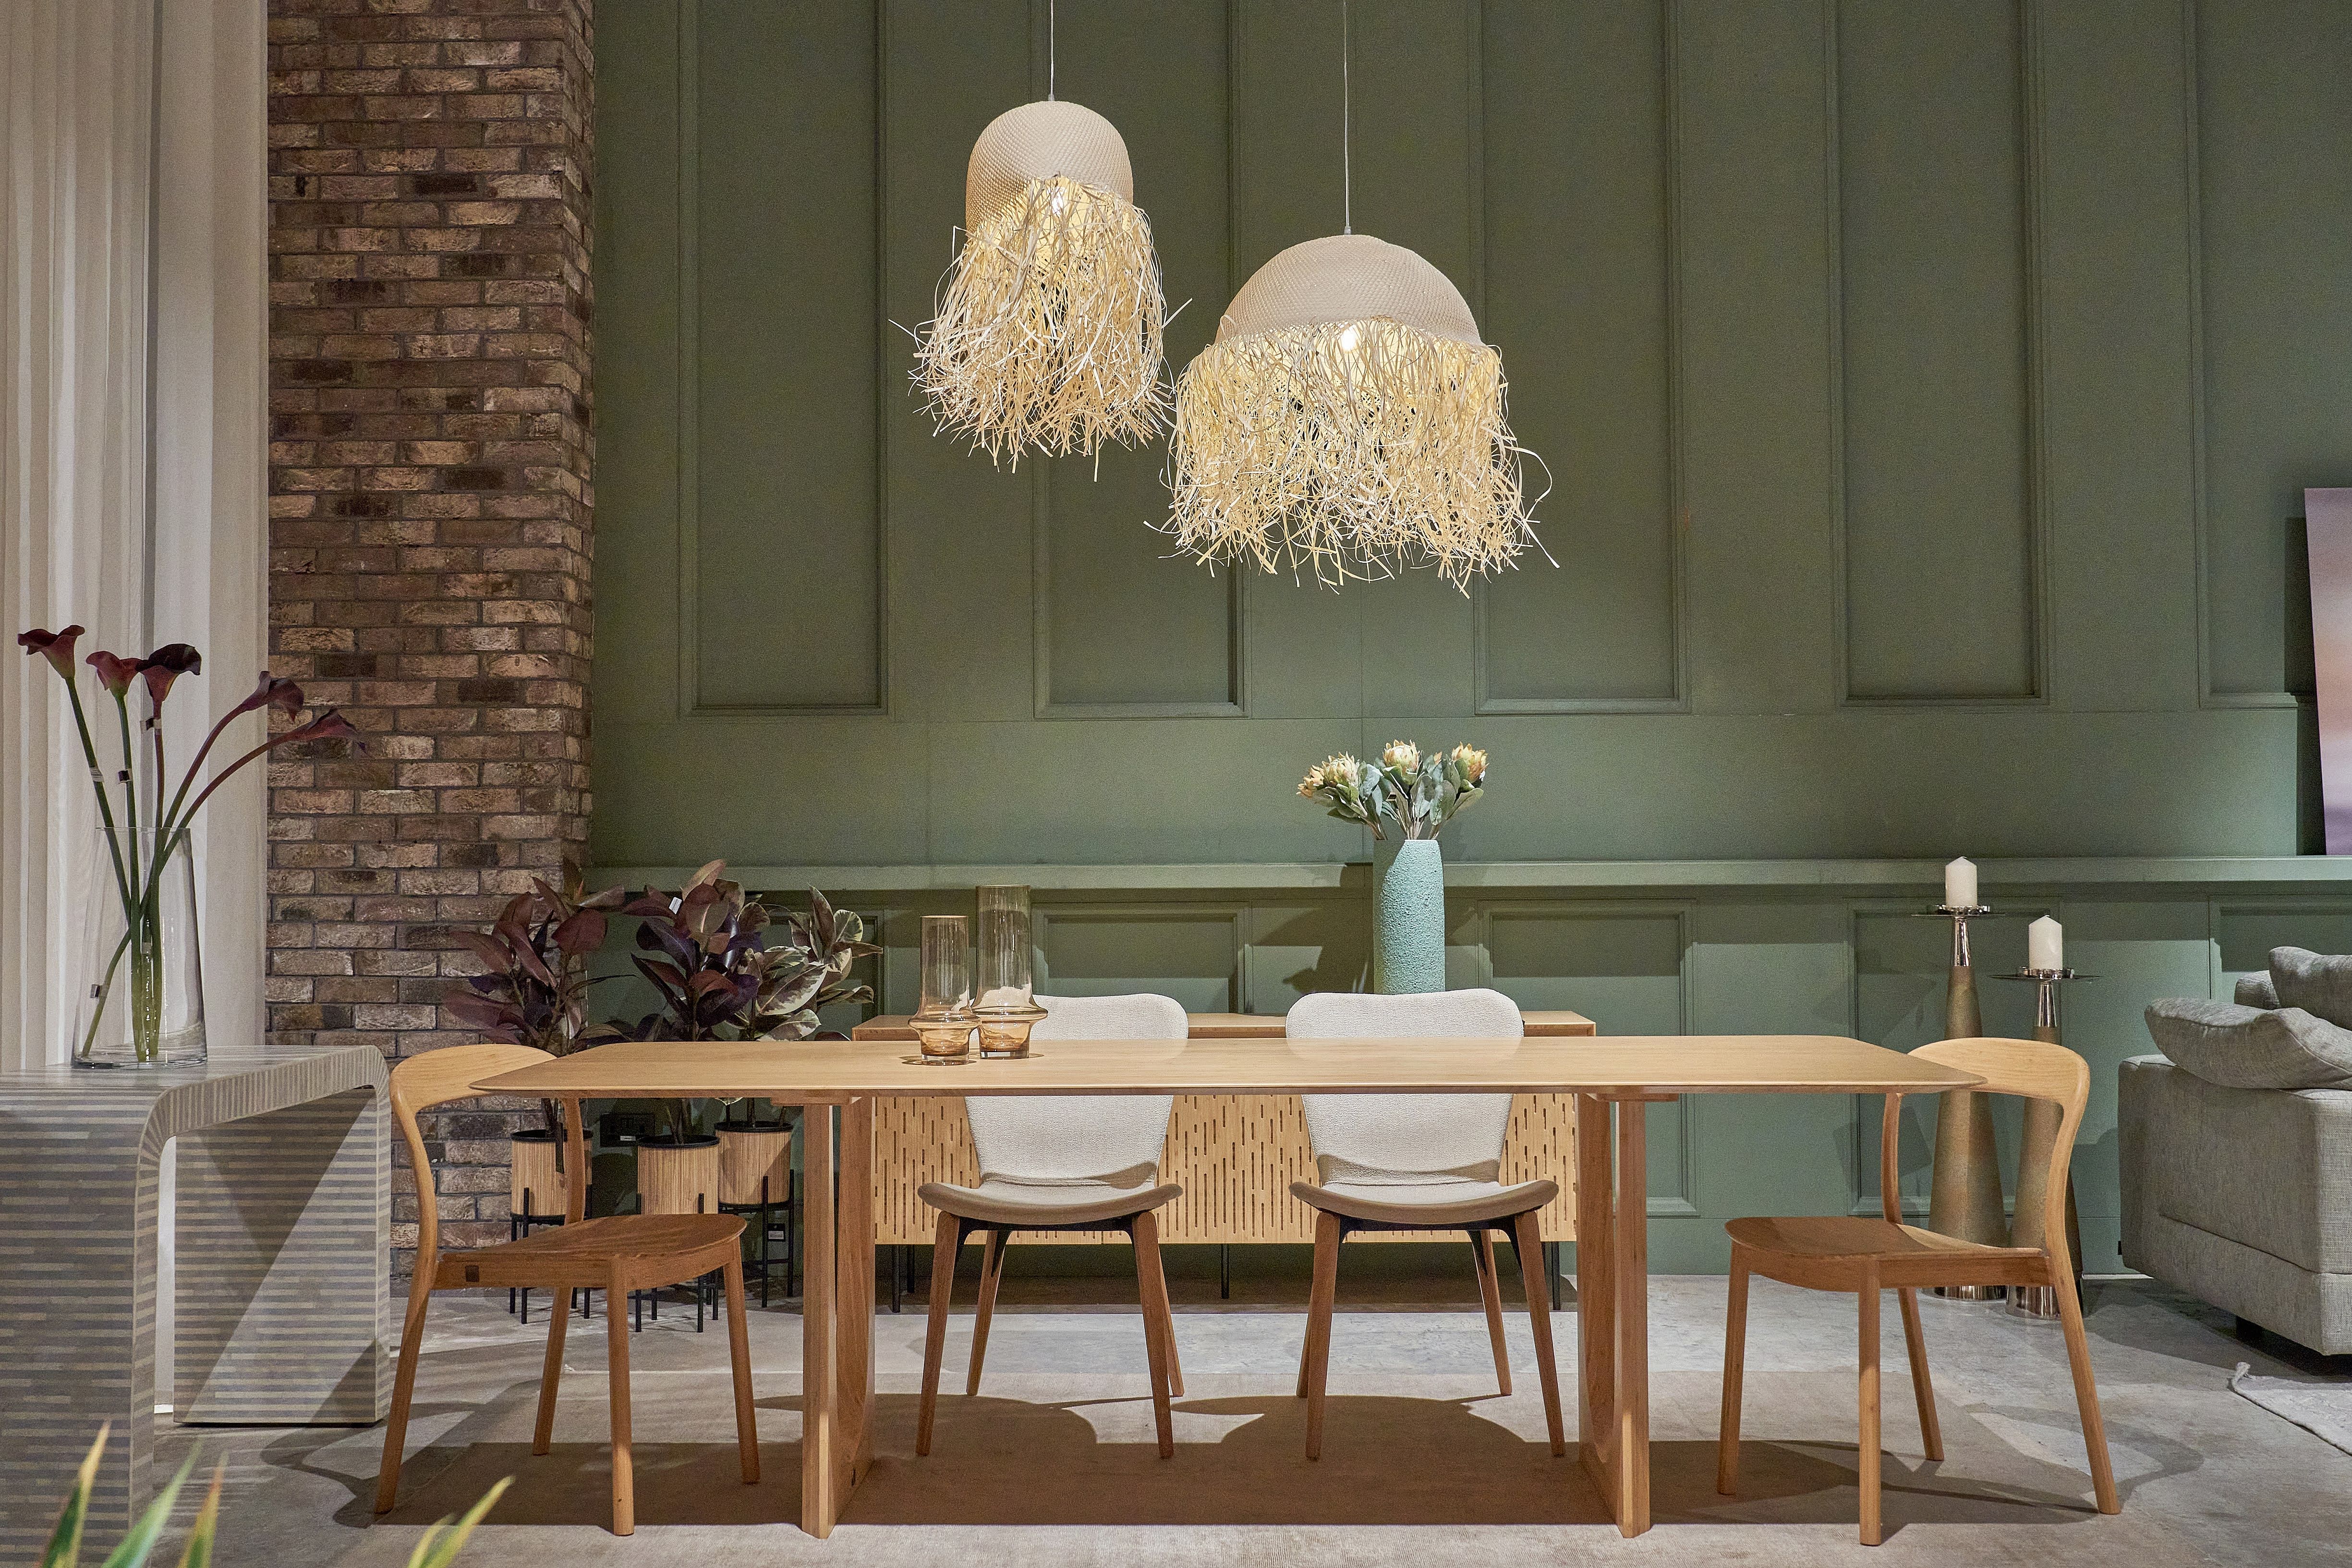 Palm leaf pendant lights hang above a wooden dining table and dining chairs set against a green and exposed brick wall.